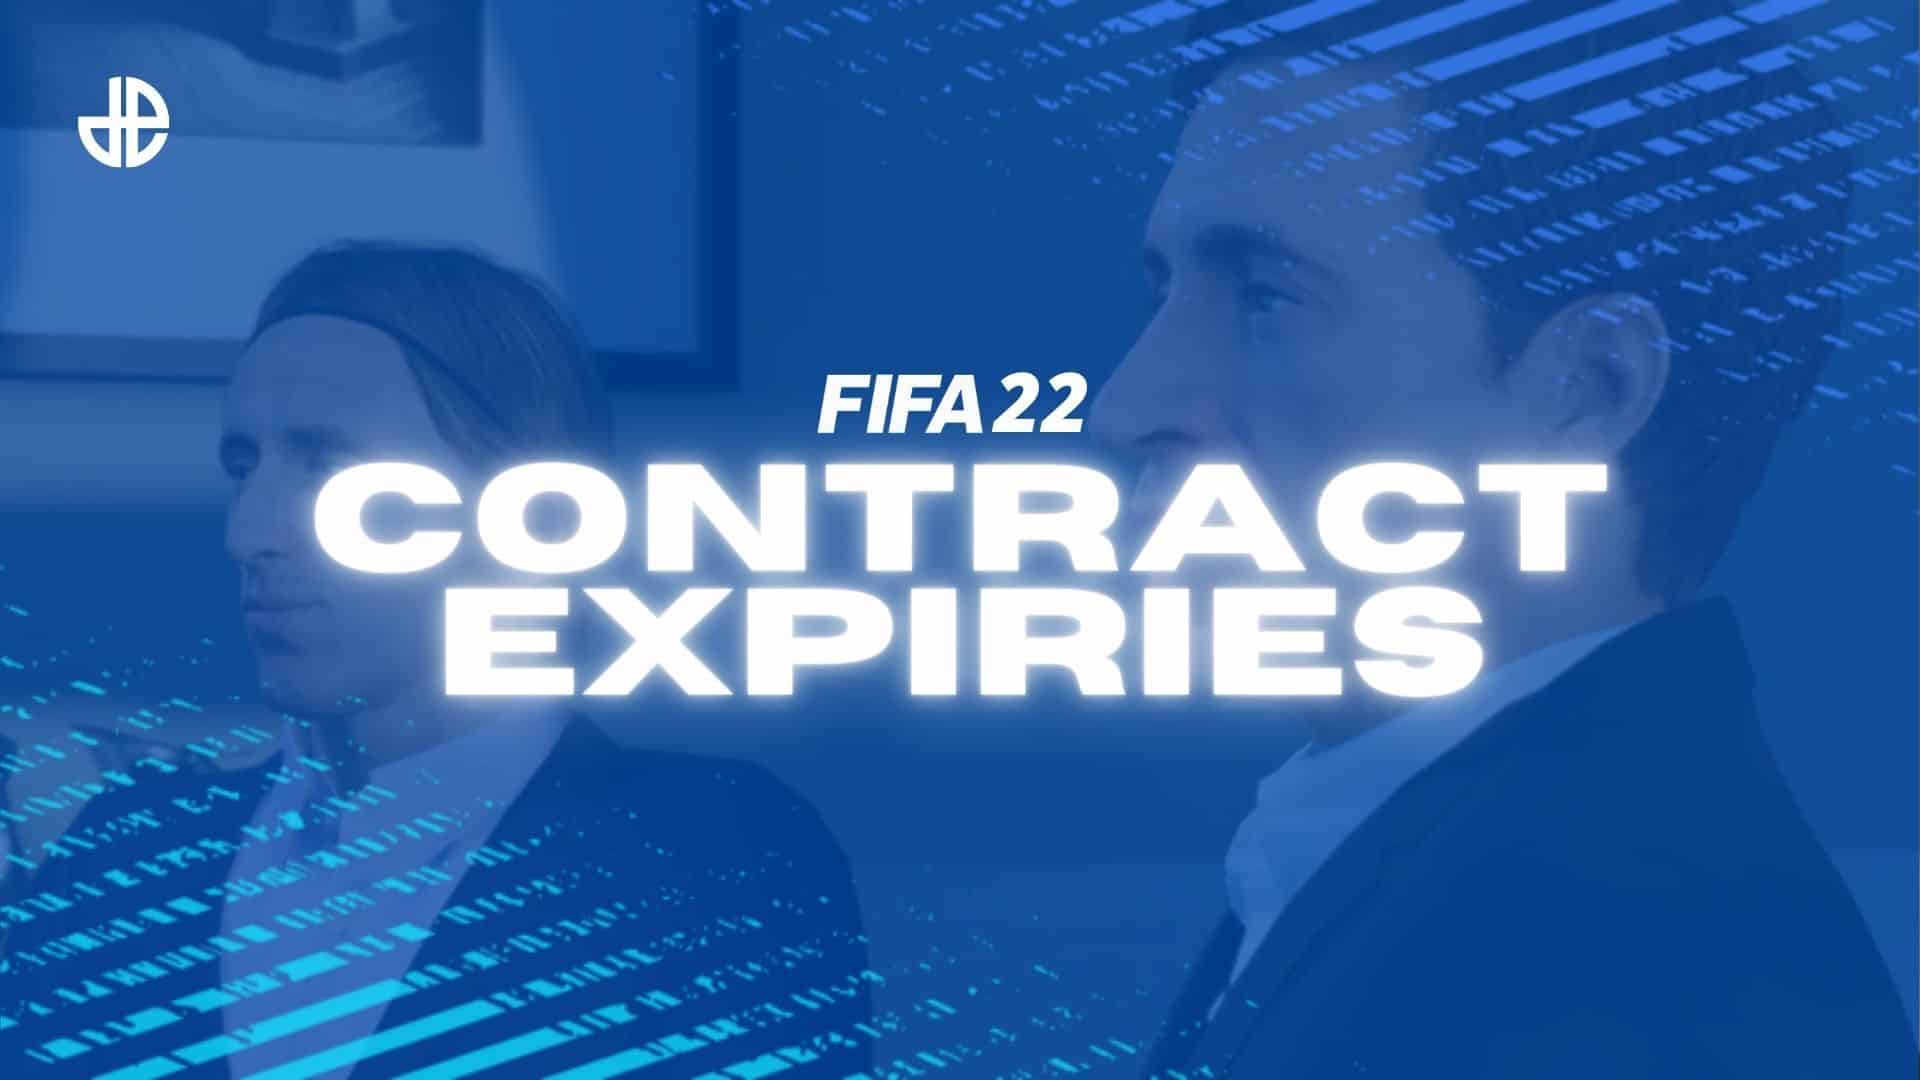 FIFA 22 tips with 7 things to know before you play